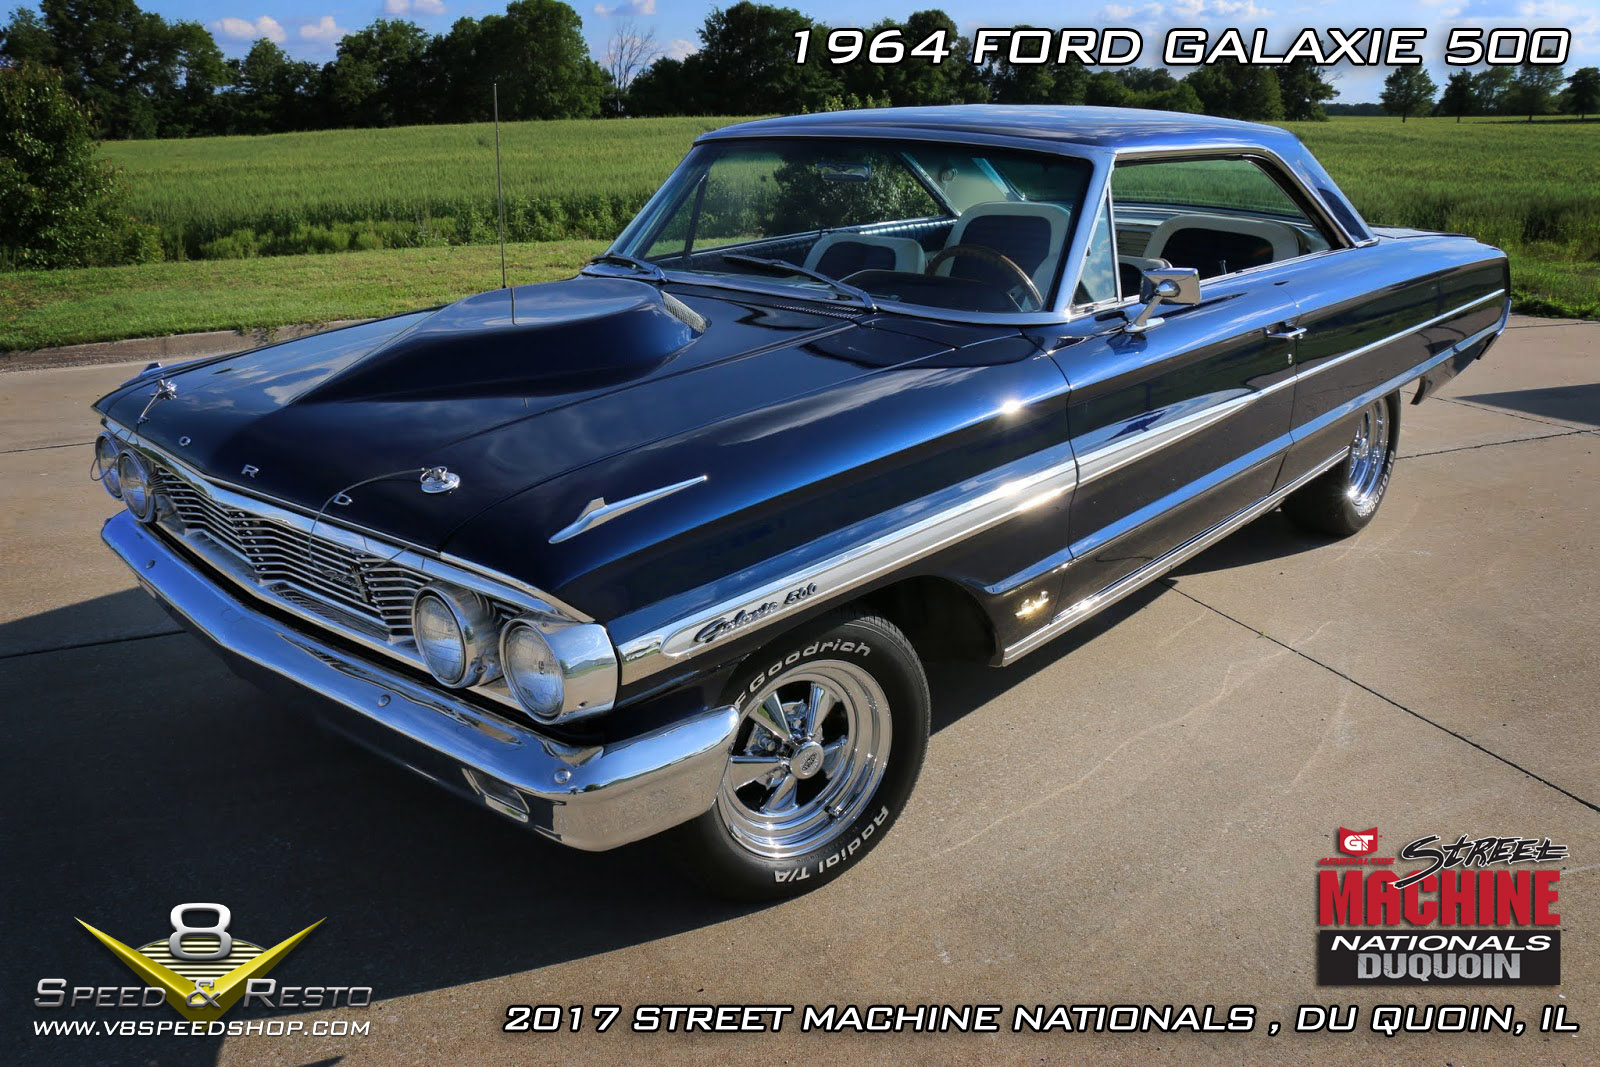 1964 Ford Galaxie shown at 2017 Street Machine Nationals in DuQuoin, IL 